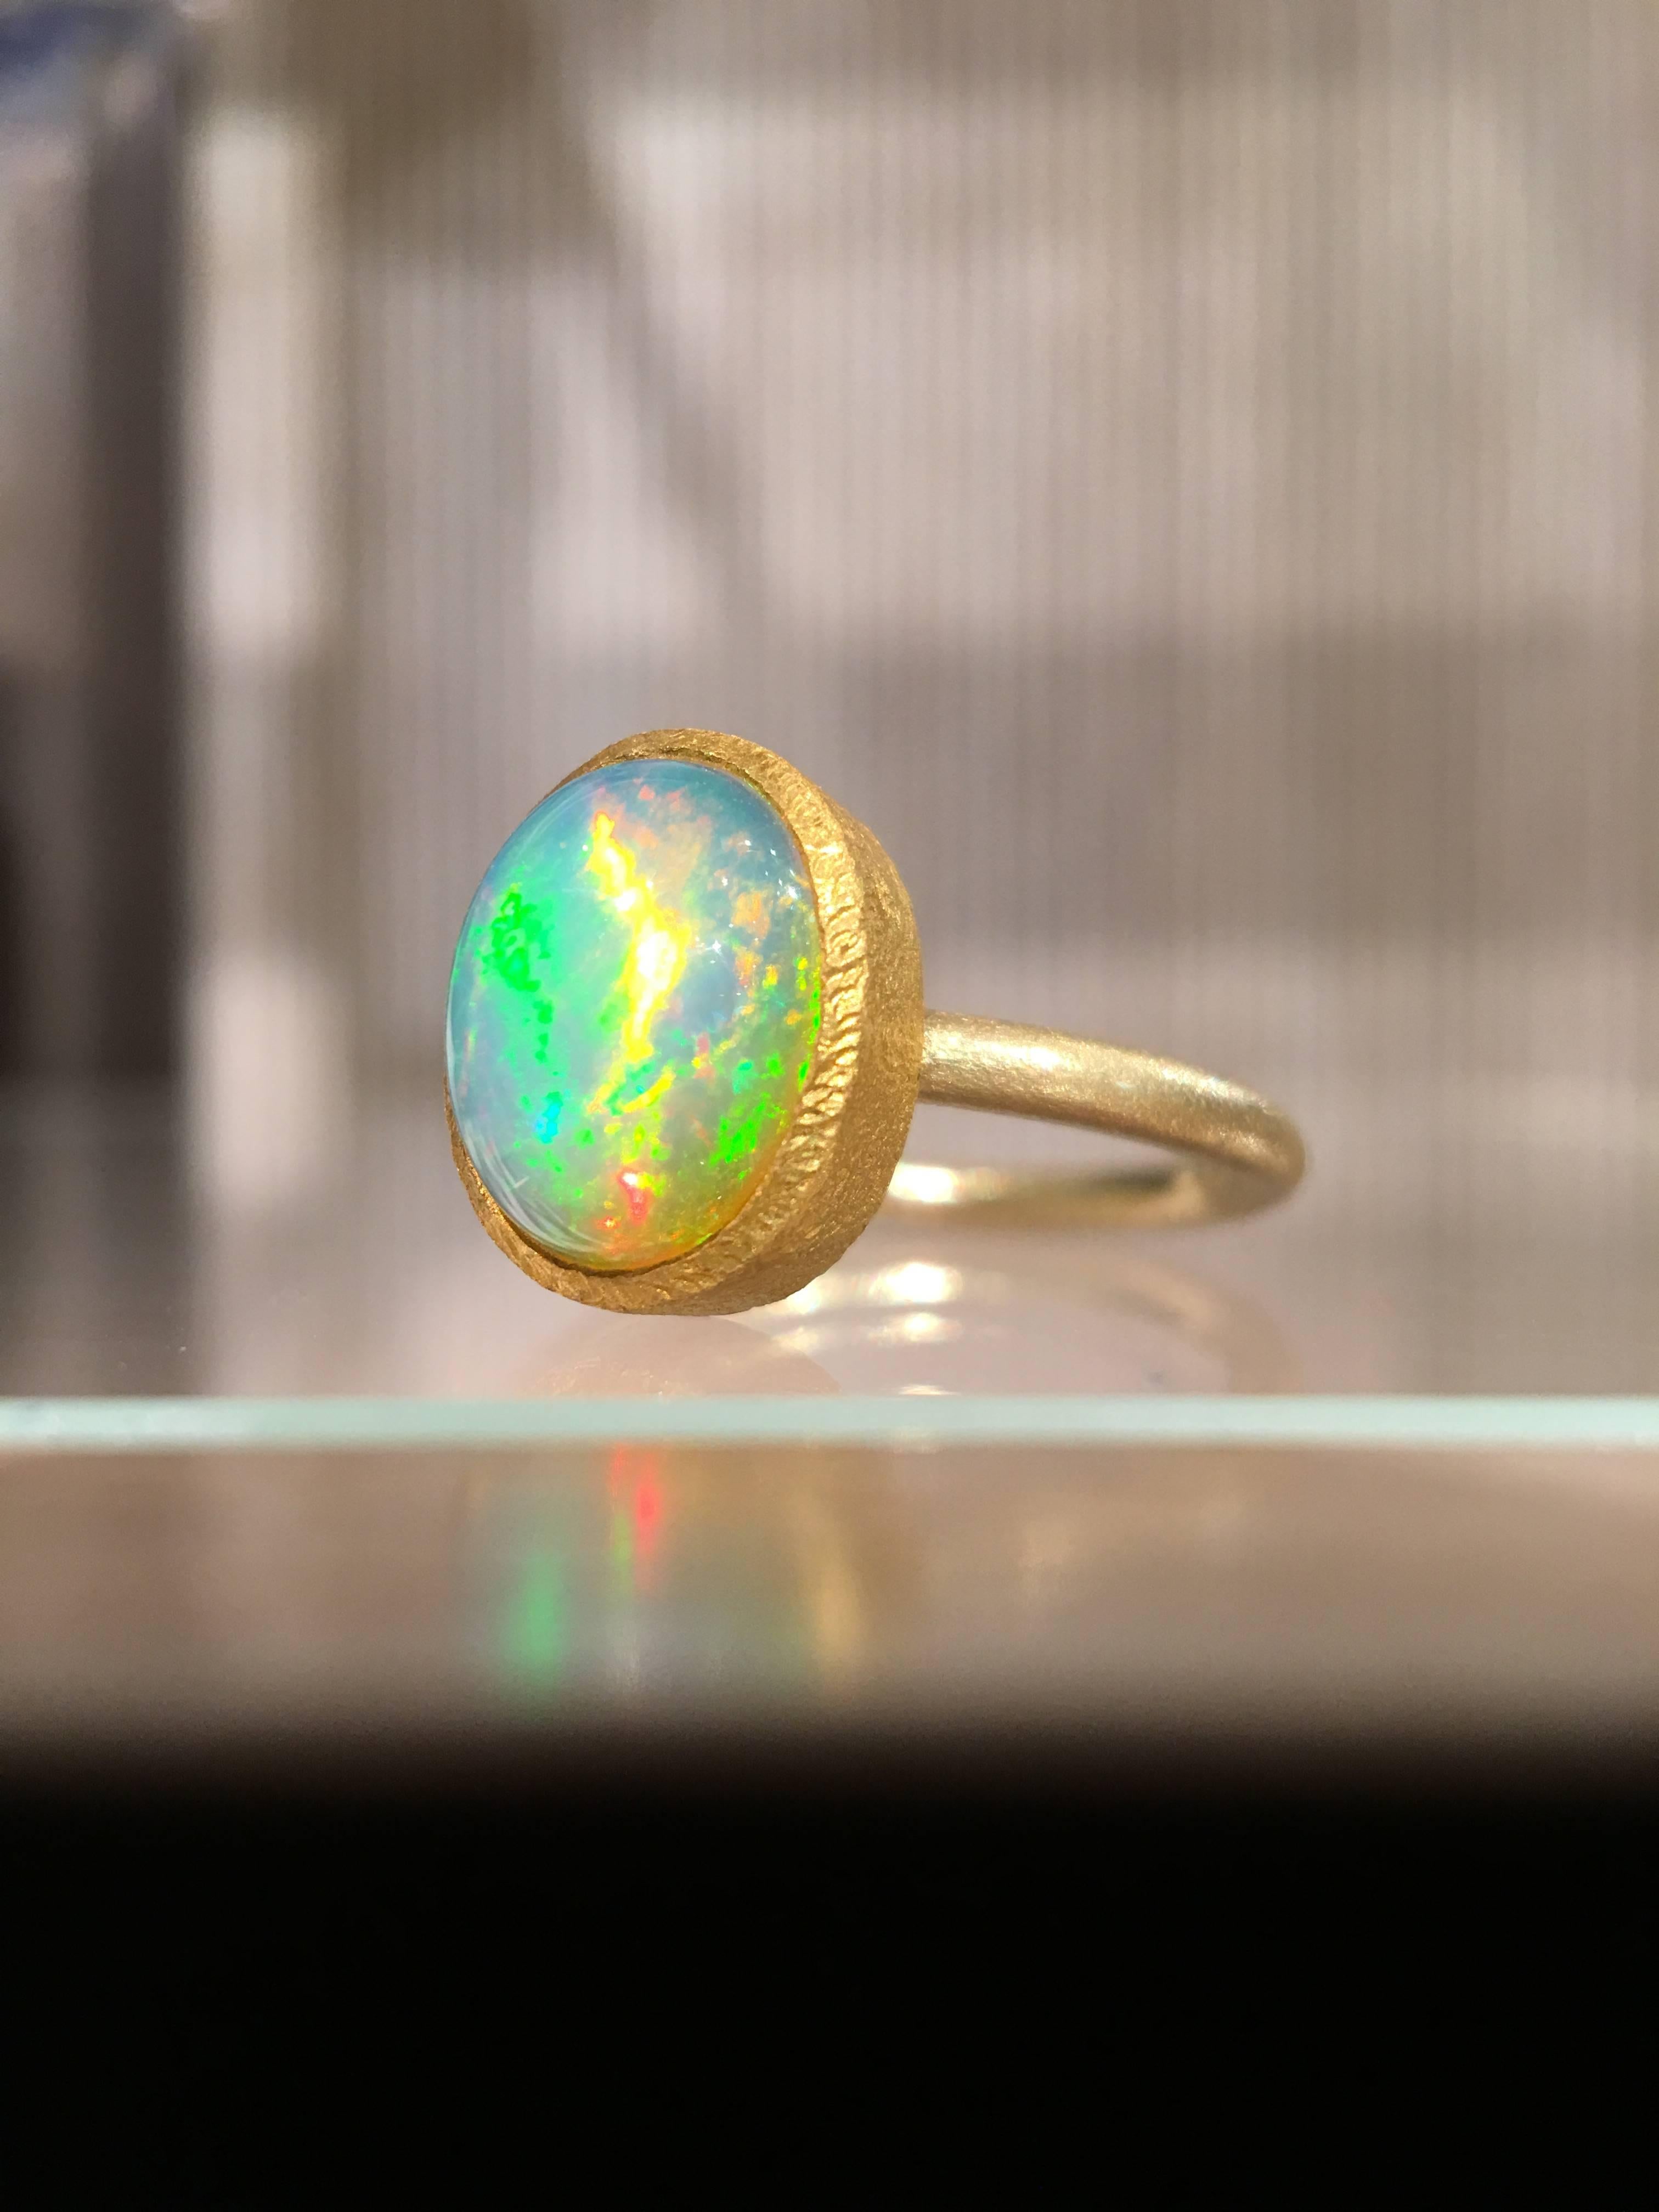 One of a Kind Ring handcrafted by acclaimed jewelry designer Devta Doolan featuring a breathtaking, completely natural translucent Ethiopian white opal (10mm x 7.5mm) with strong primary flashes of electrifying green, orange and pink complemented